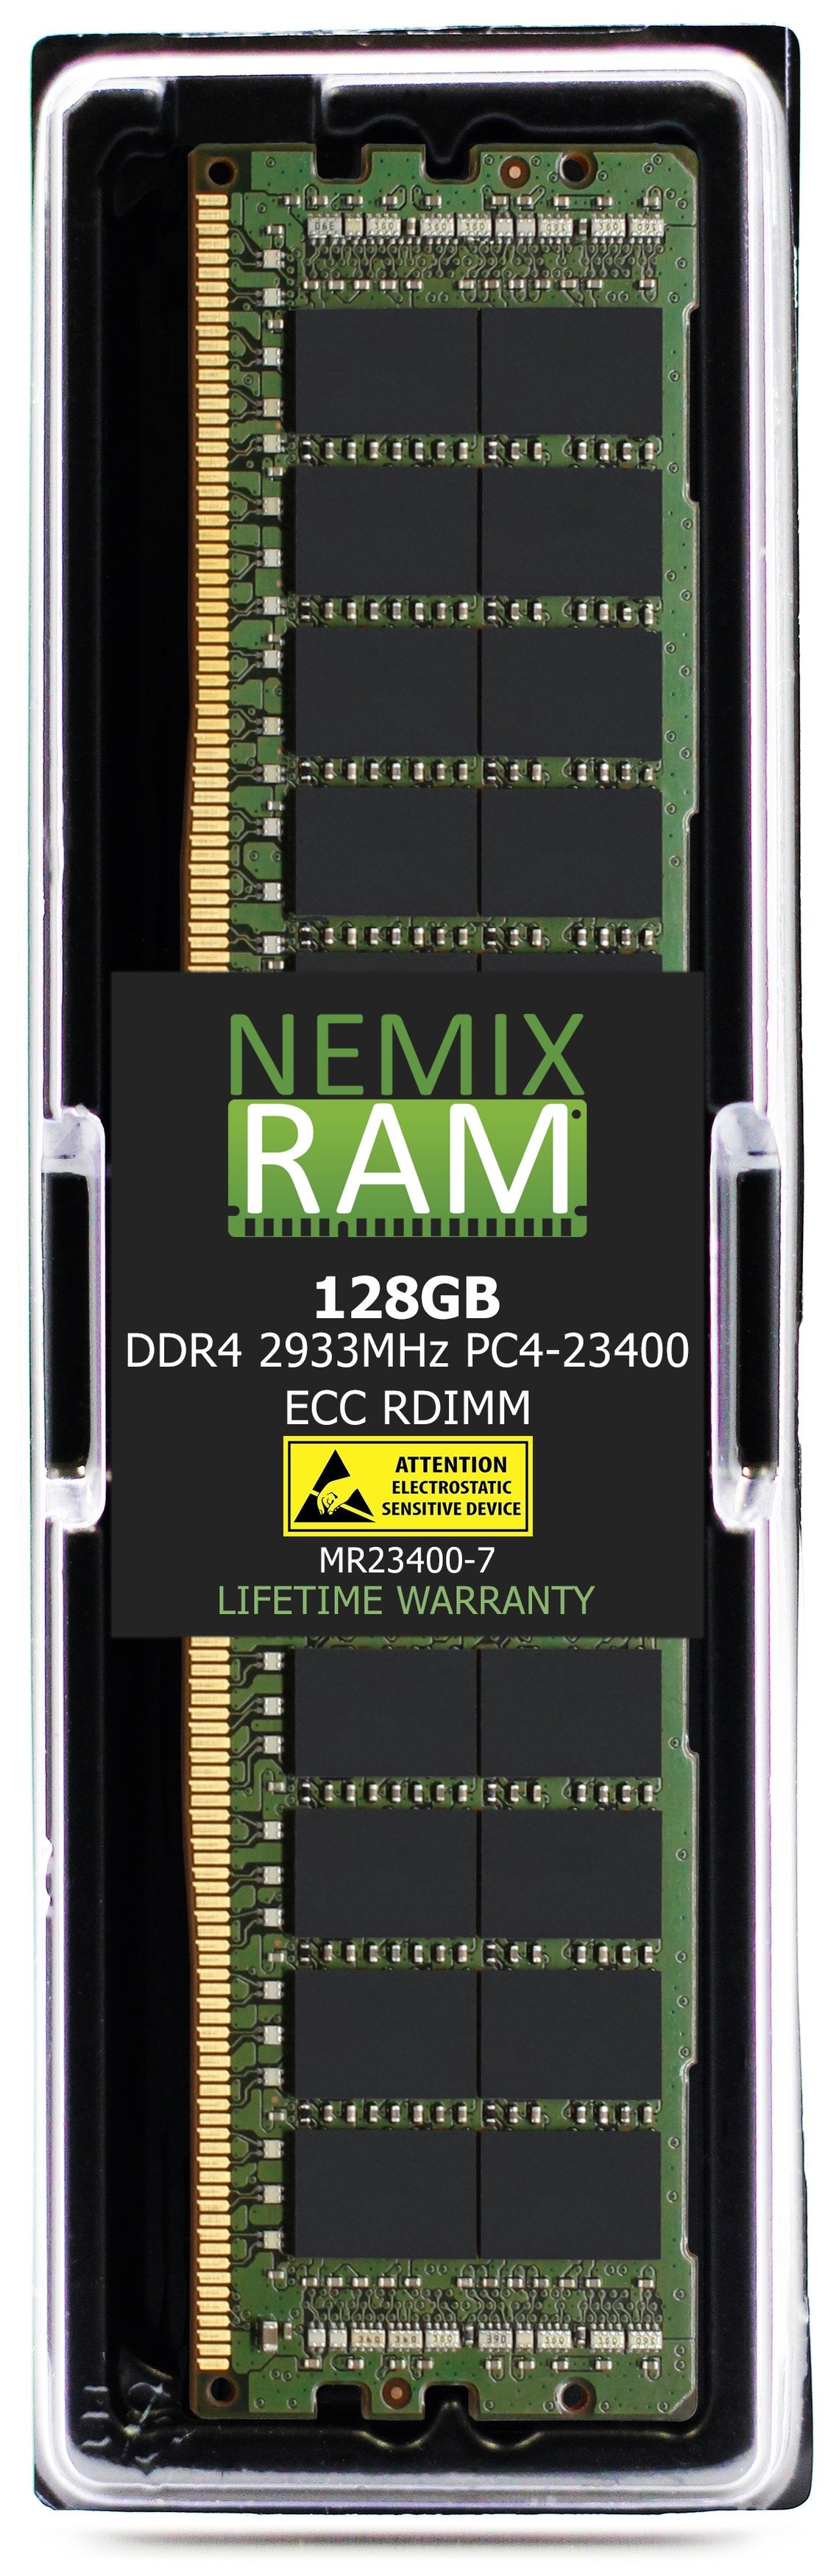 128GB DDR4 2933MHZ PC4-23400 RDIMM Compatible with Supermicro MEM-DR412MH-ER29